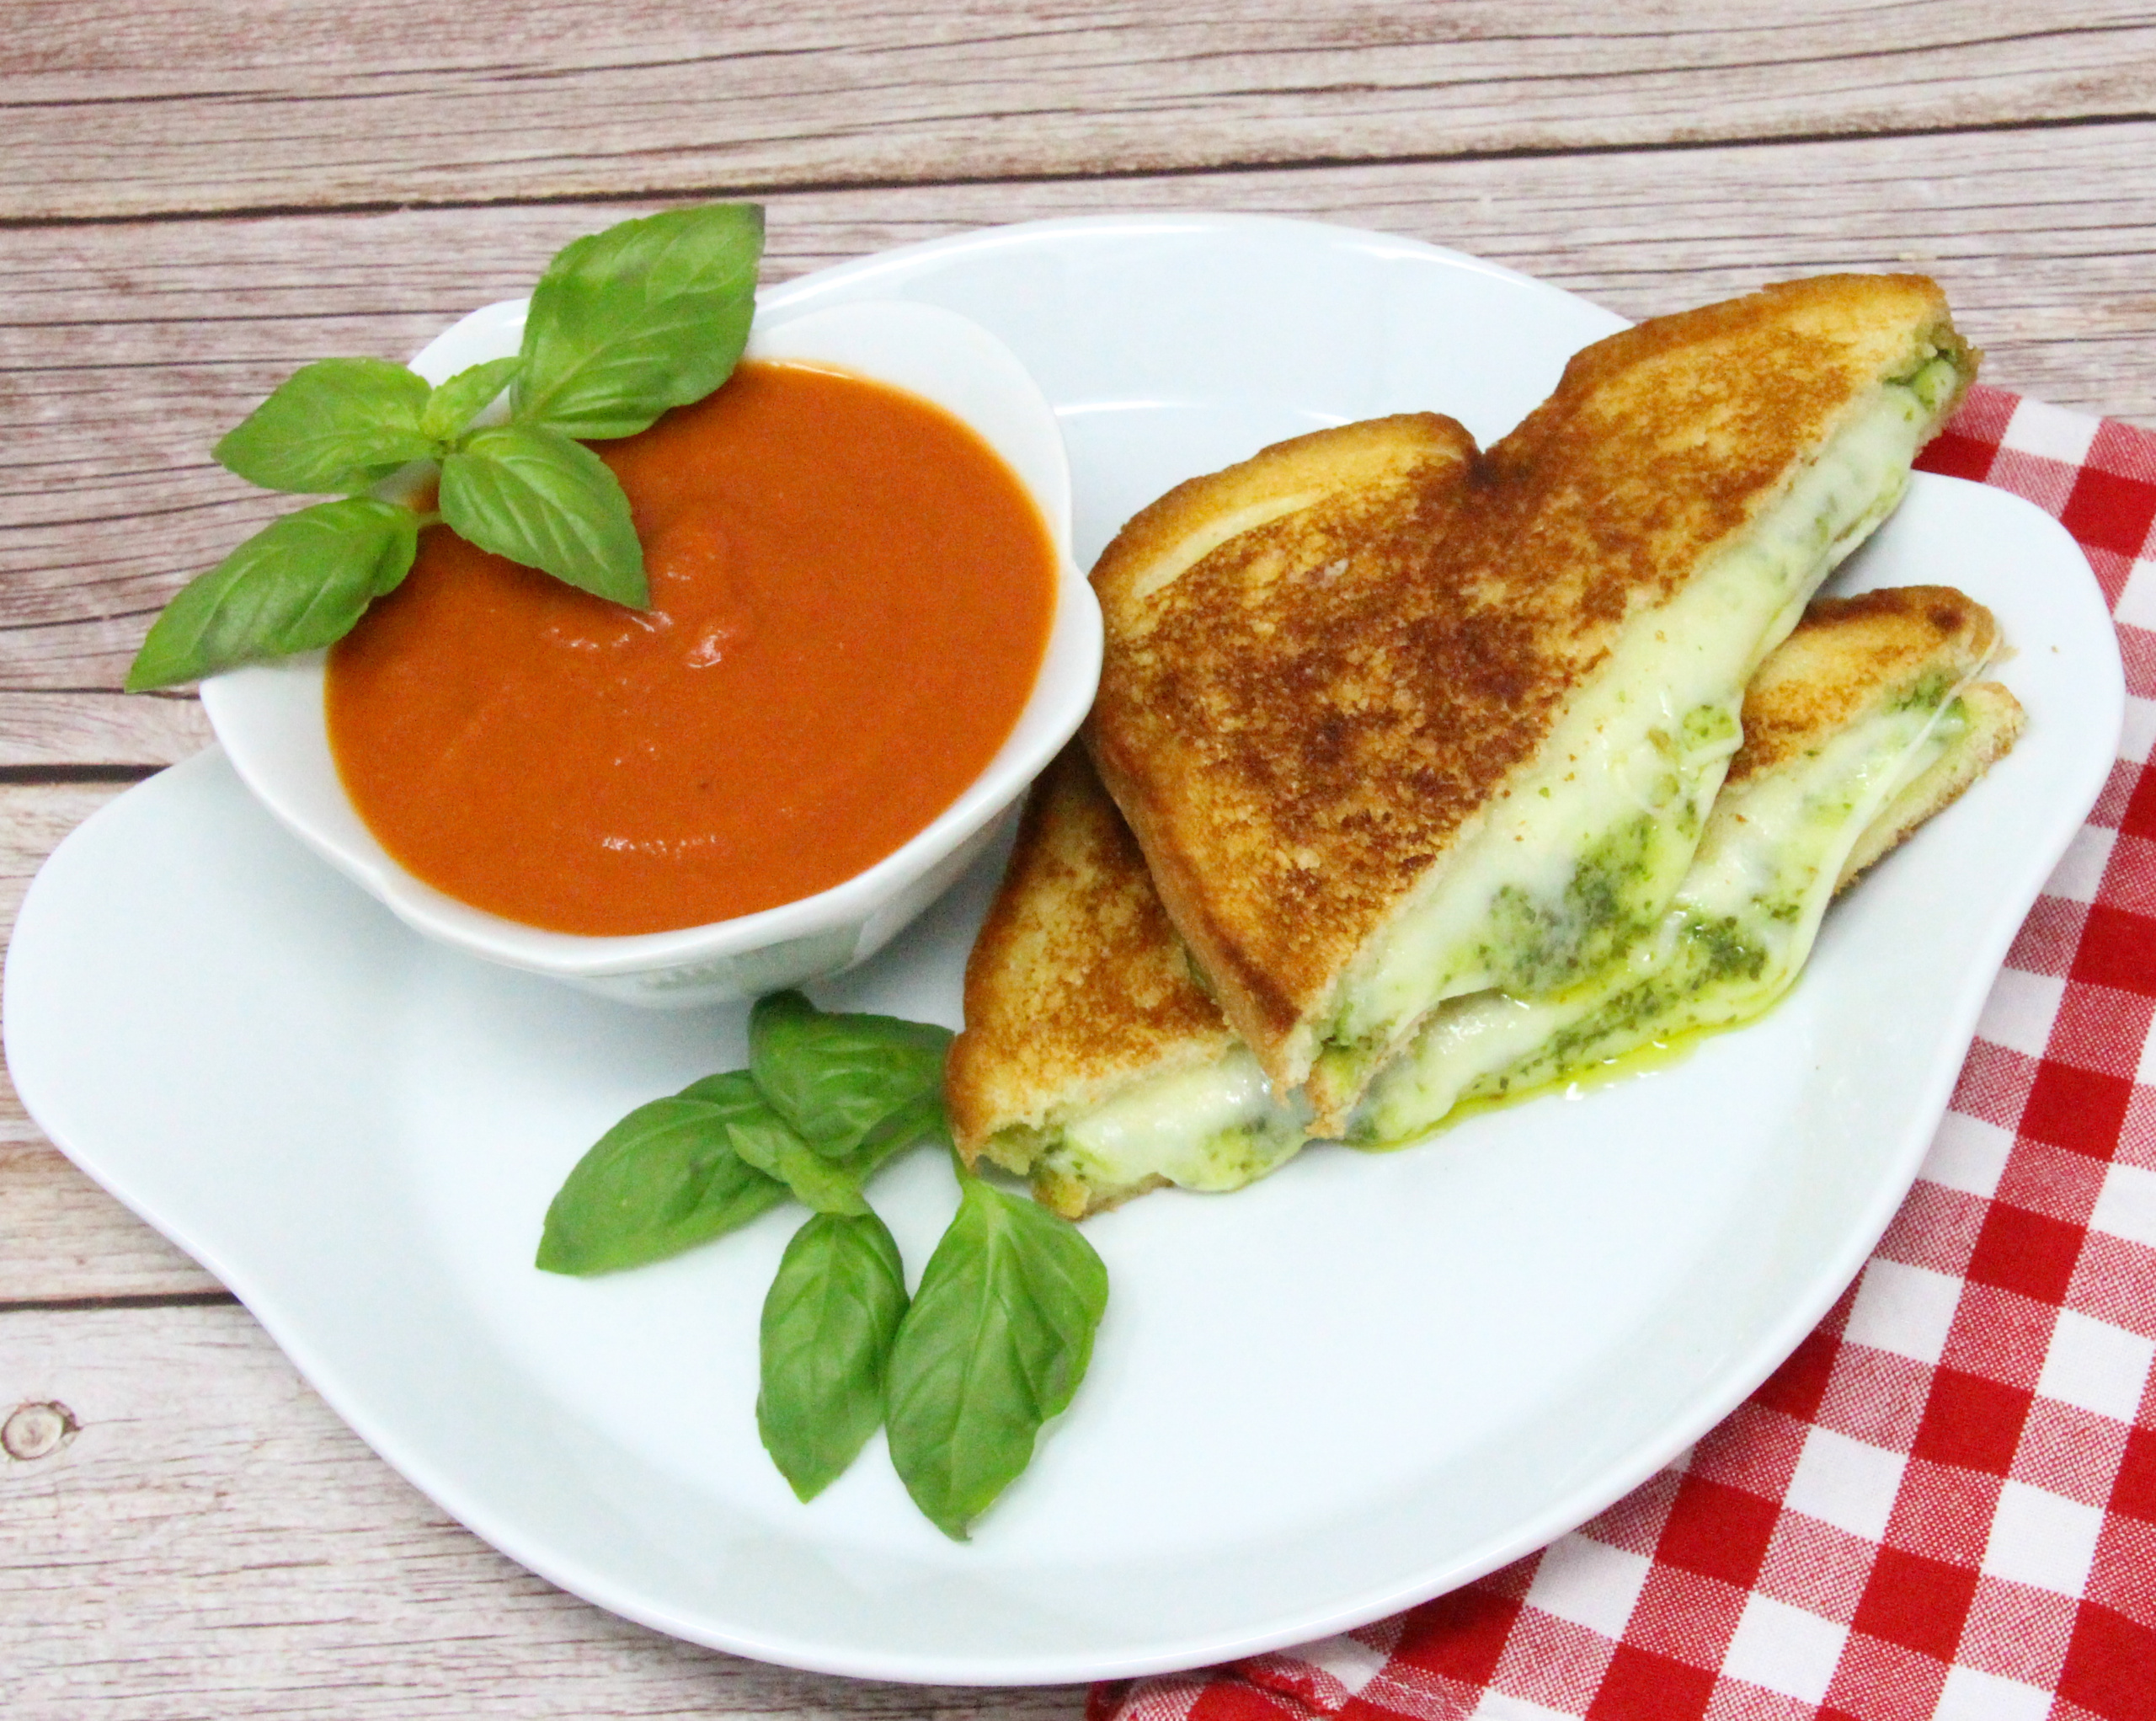 Zesty Pesto Grilled Cheese Sandwich pairs pesto with creamy provolone while the crunchy exterior of the bread provides a nice contrast. Eaten on its own or with Grant’s Tomato Soup, this sandwich is a flavorful delight! Recipe shared with permission granted by Linda Reilly, author of BRIE CAREFUL WHAT YOU WISH FOR. 